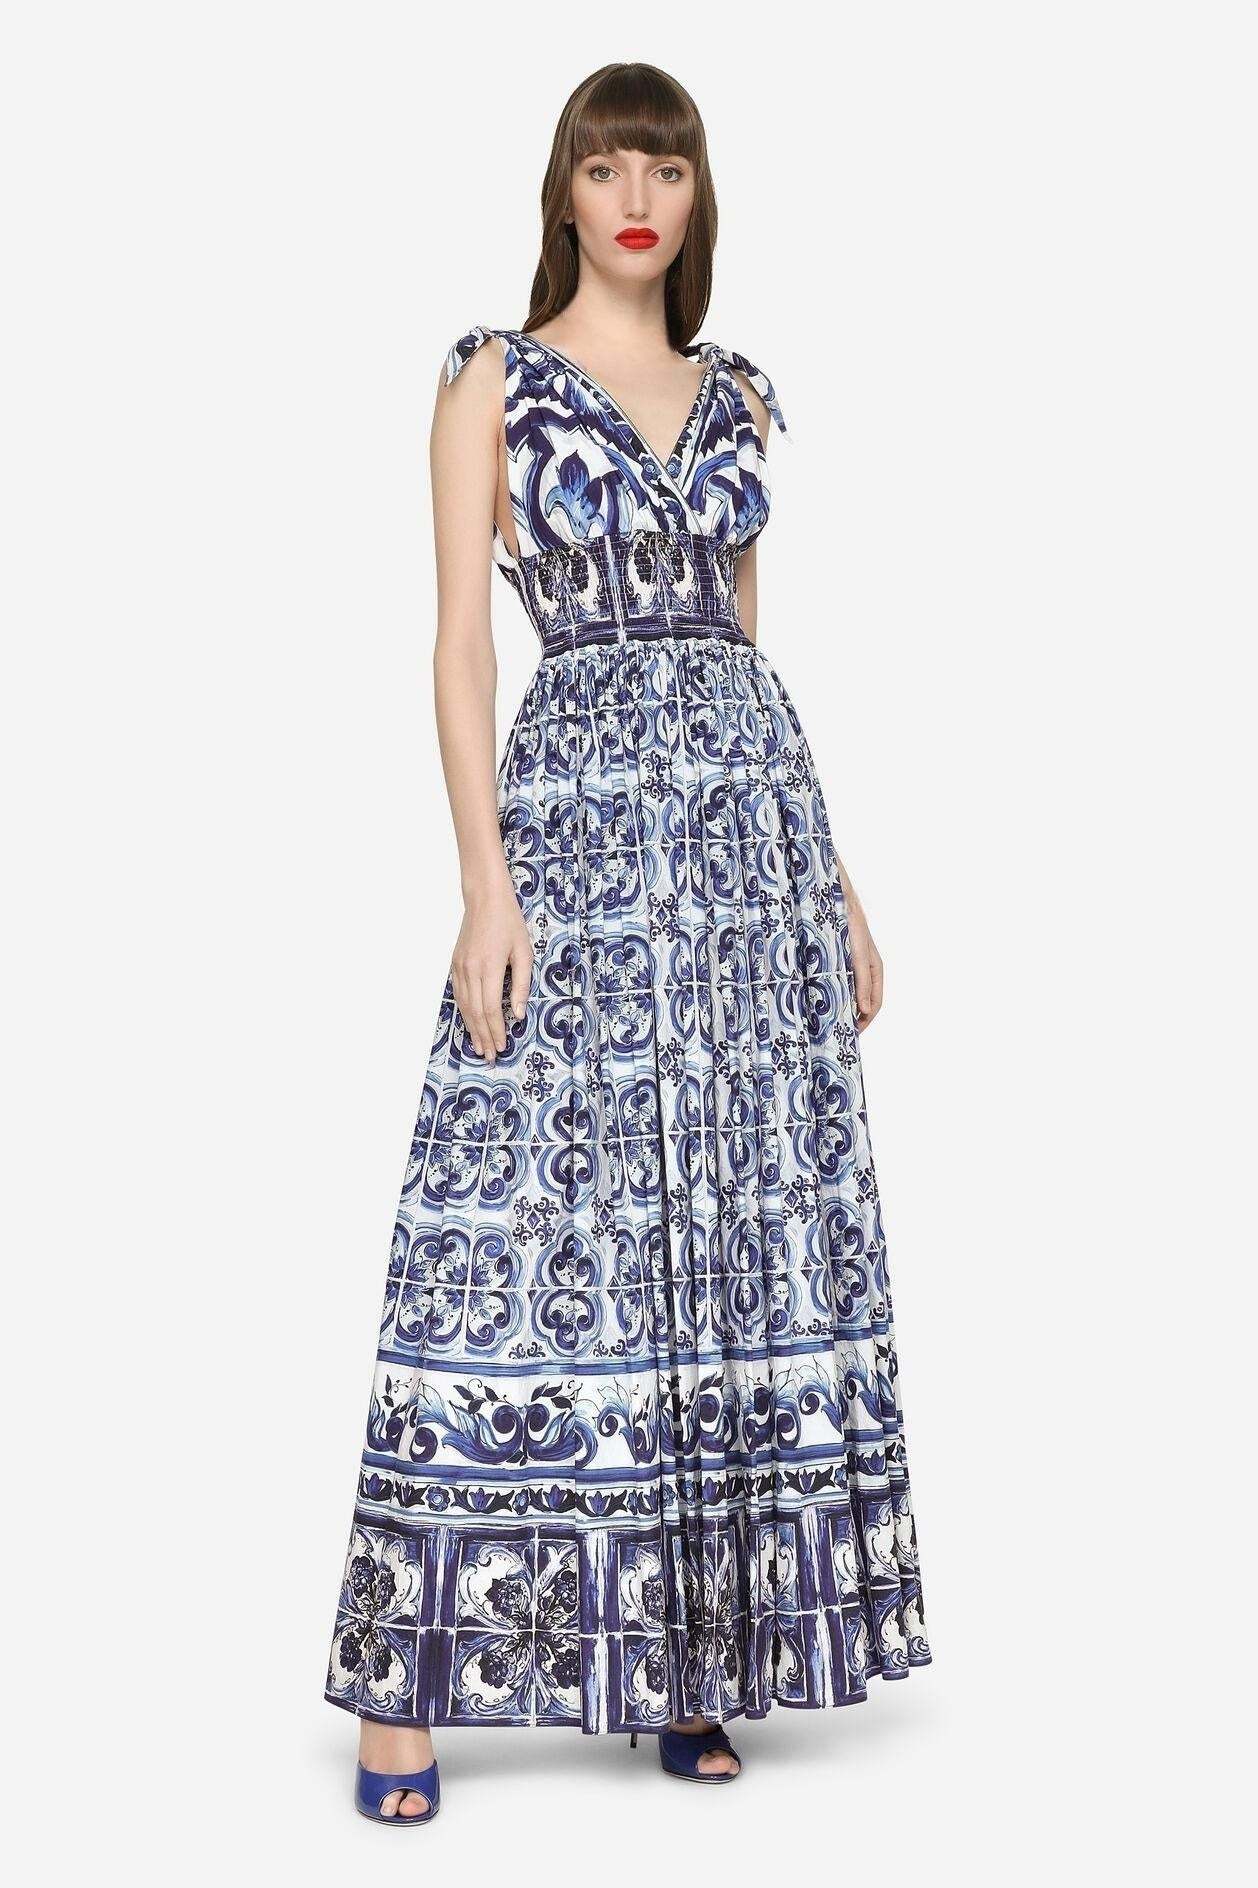 dresses-Sibyl Printed Knotted Strap Maxi Dress-SD0020627643-Blue-S - Sunfere